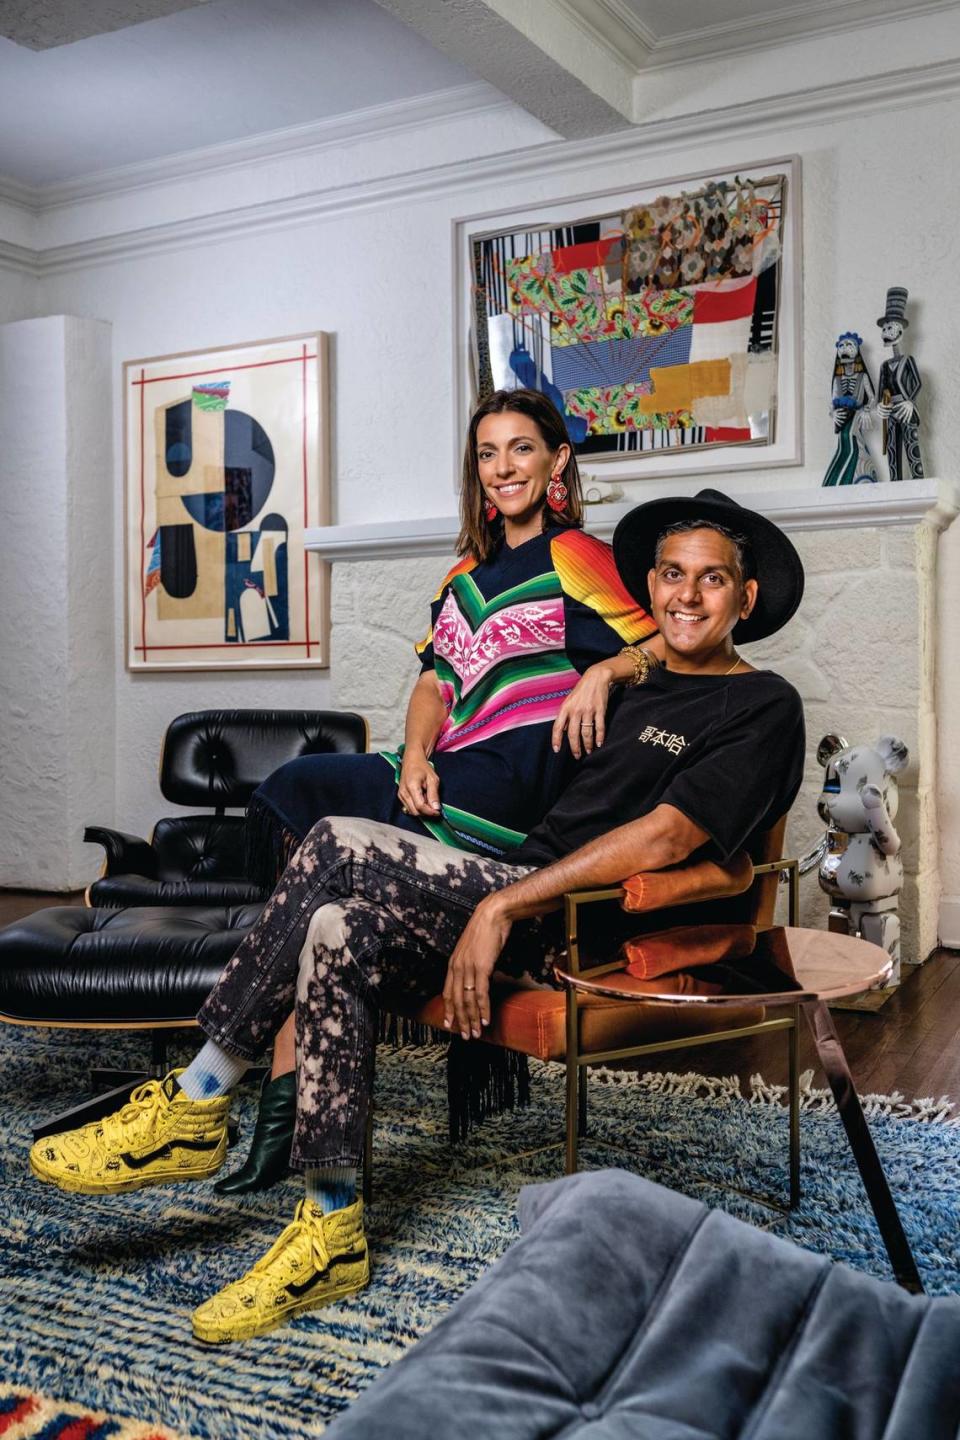 Vivek and Carolina García Jayaram co-produced “Making Miami,” an exhibition about local artists and nonprofits that built Miami’s contemporary arts scene.